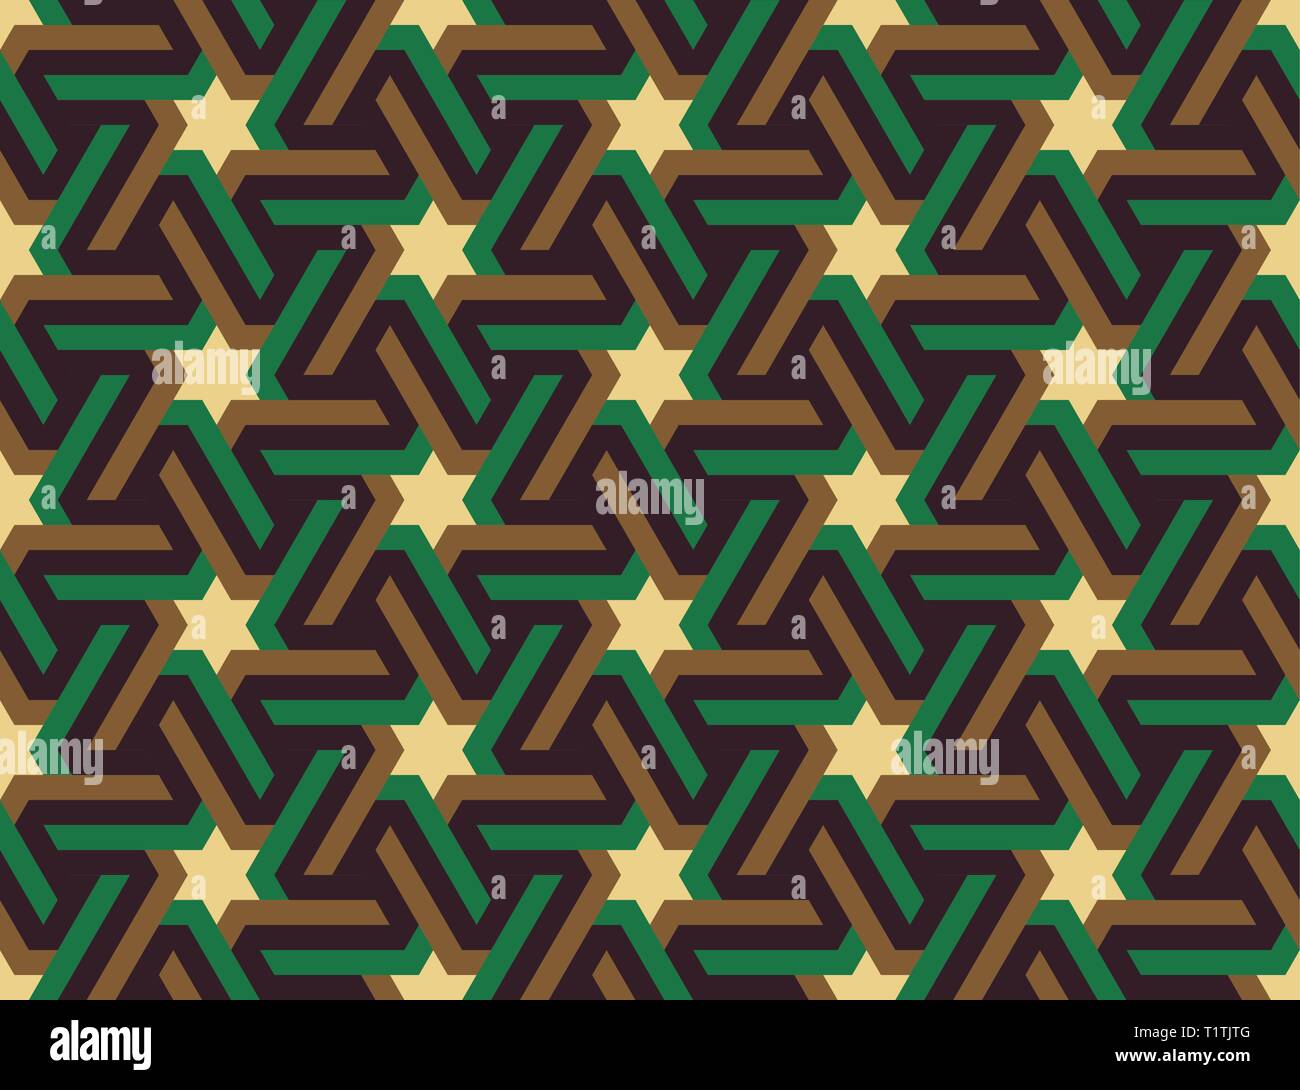 Seamless geometric Islamic ornament with hexagonal stars. Multicolored Arabic ornament. Pattern of the countries of the Arabian Peninsula and the Midd Stock Vector